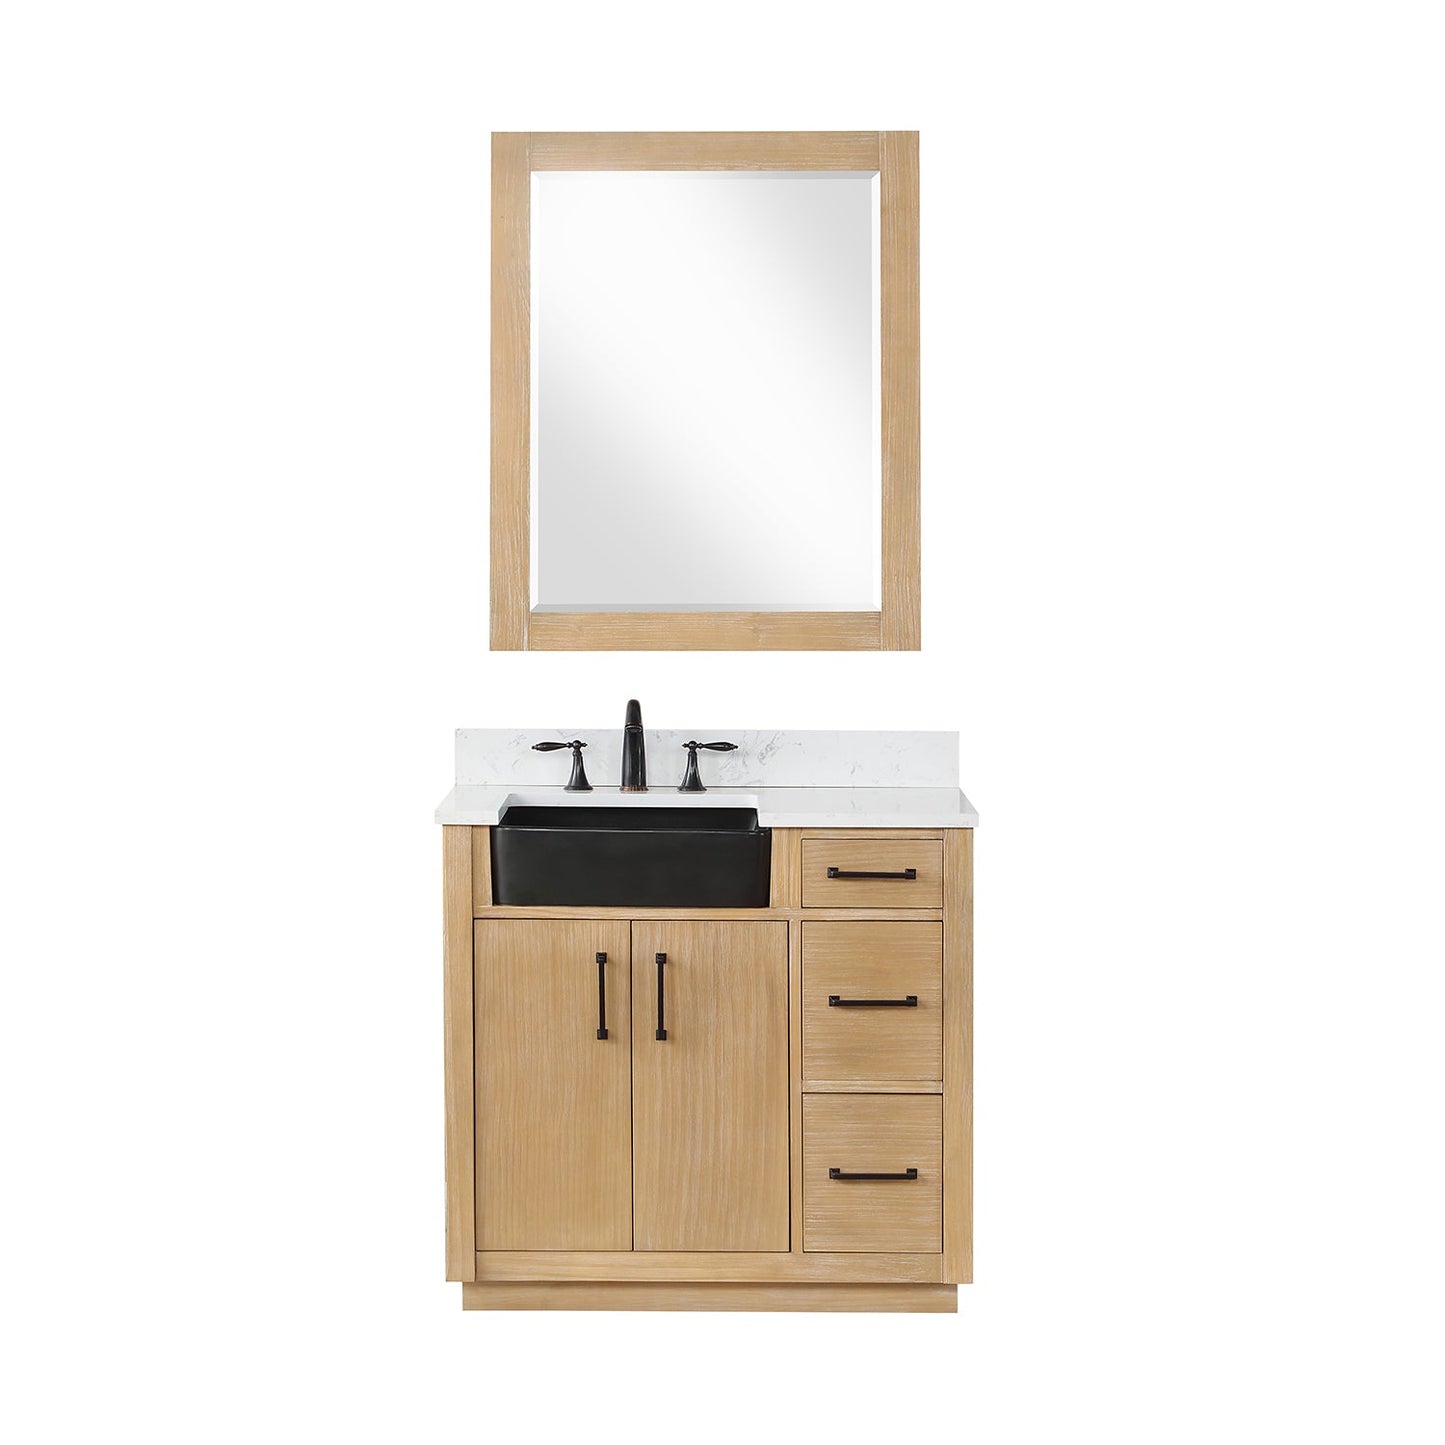 Novago 36" Single Bathroom Vanity in Weathered Pine with Carrara White Composite Stone Countertop and Farmhouse Sink with Mirror